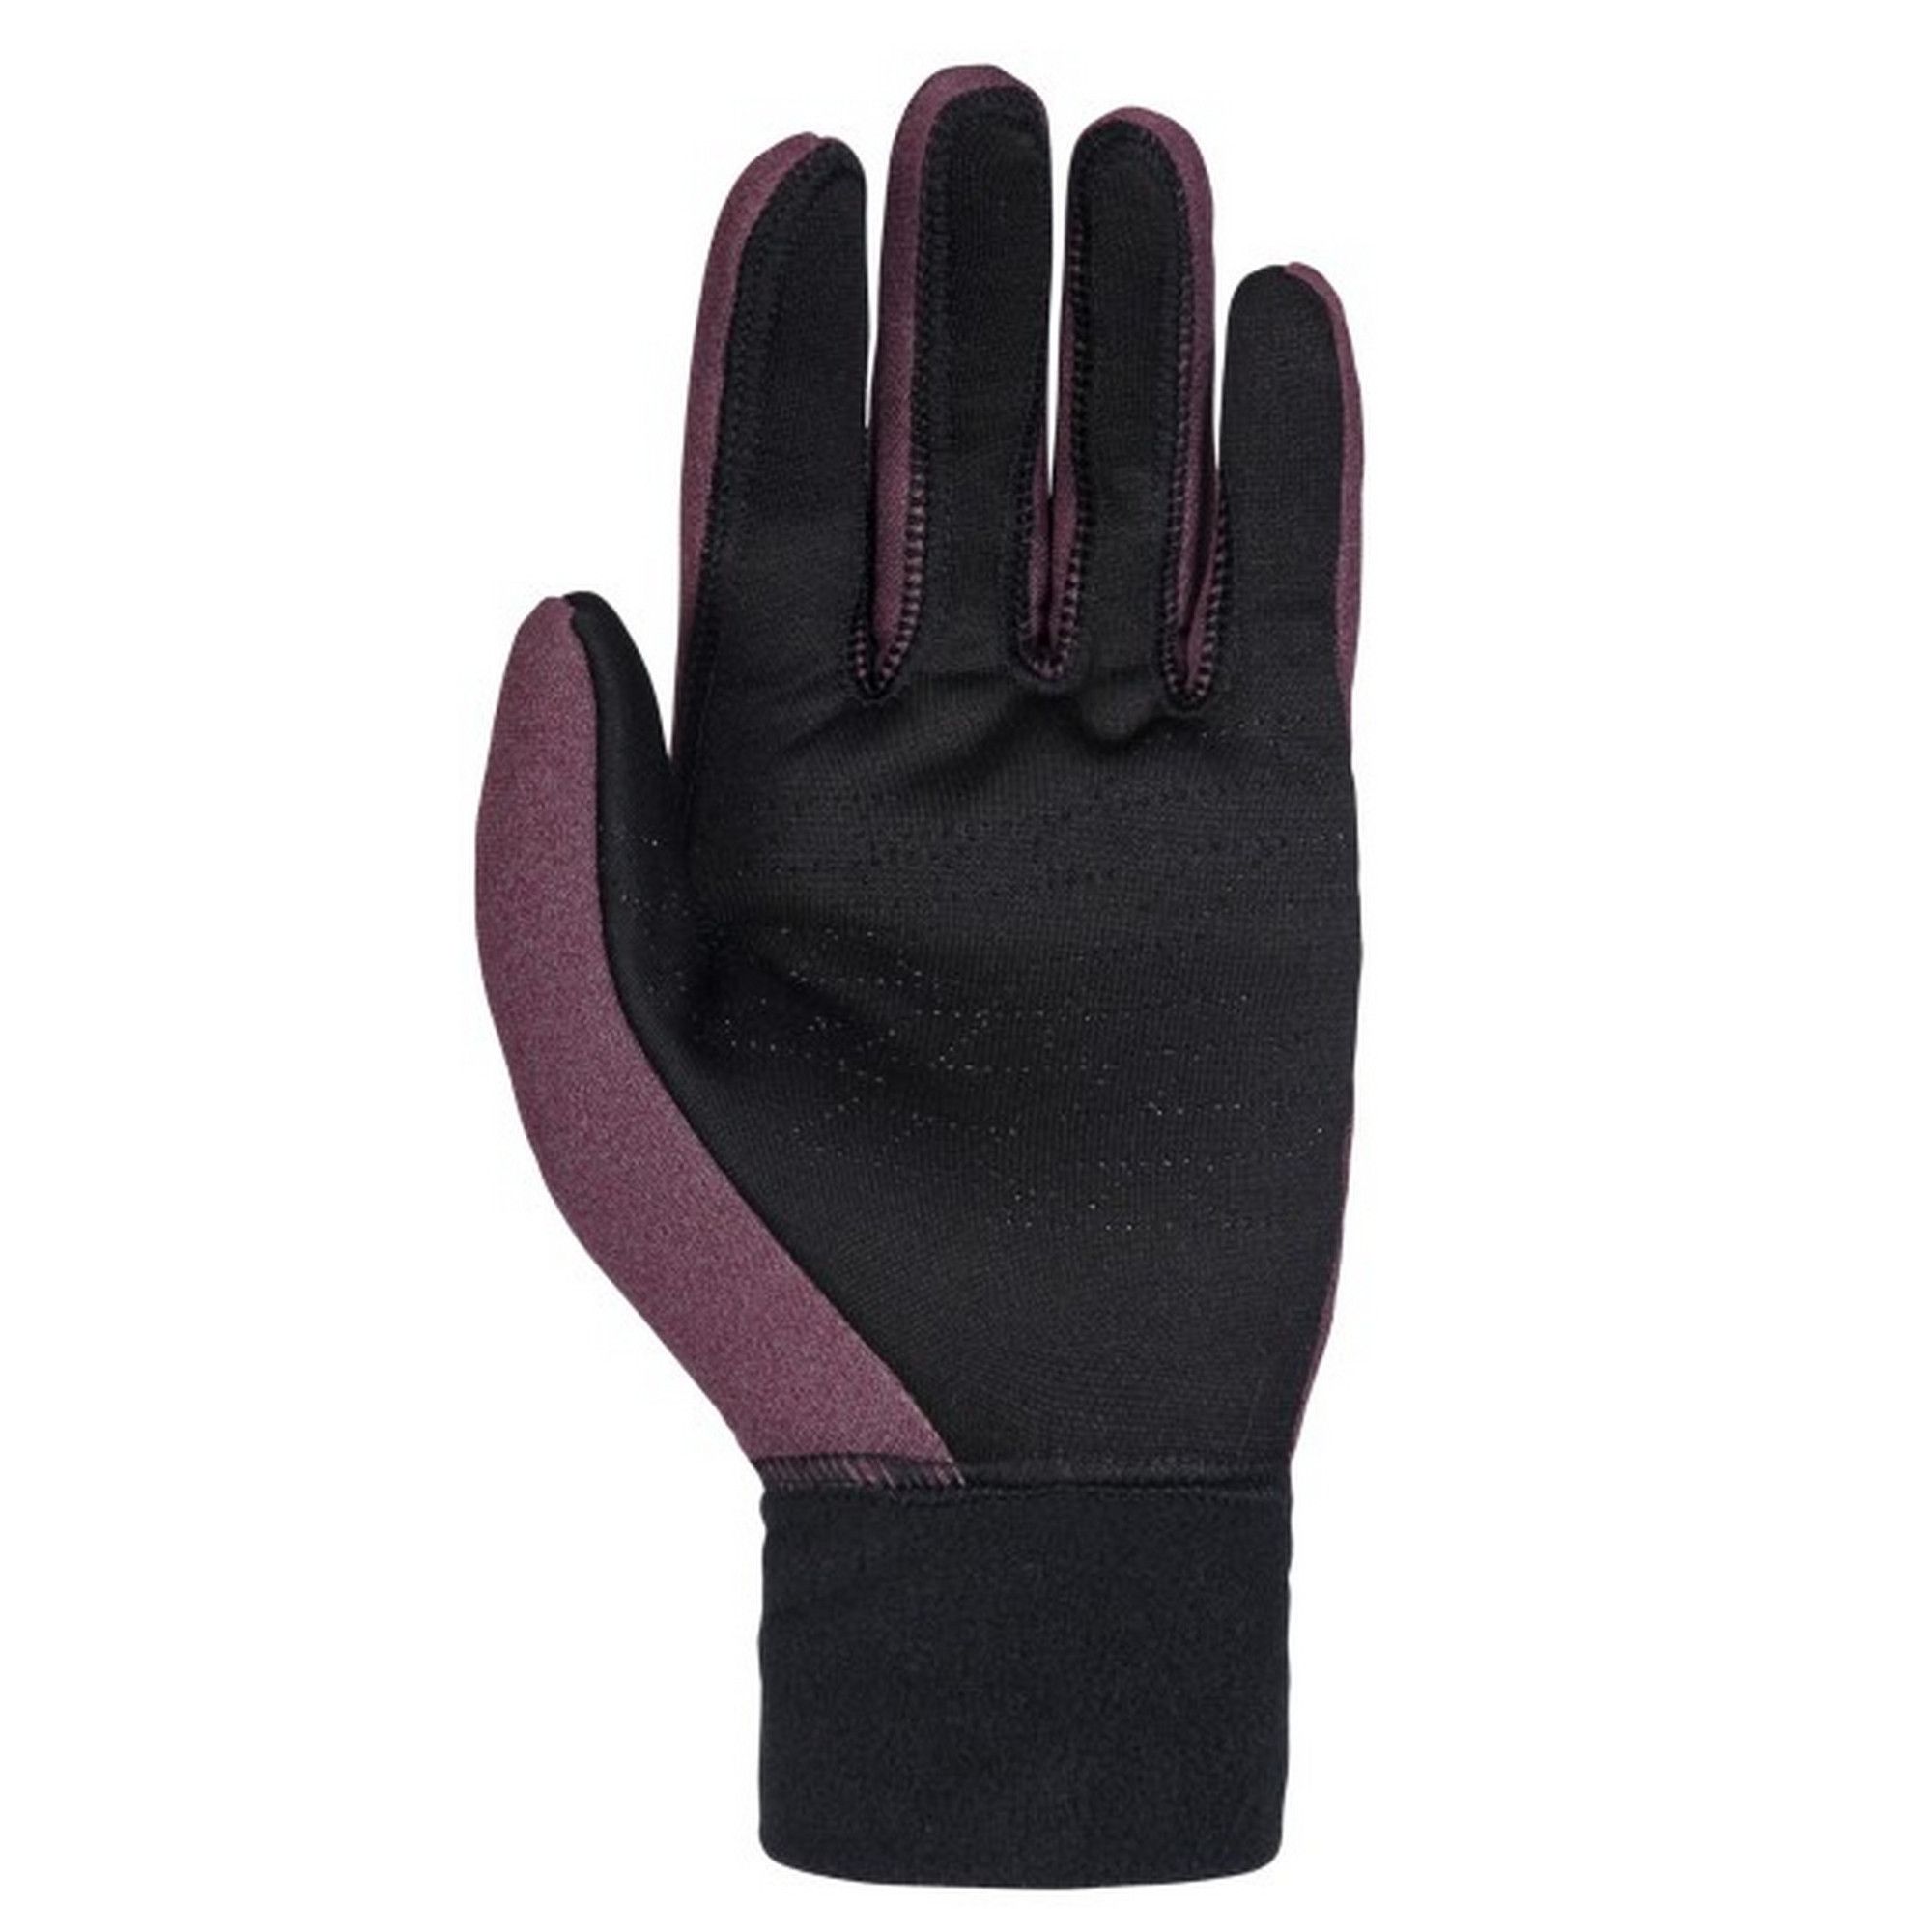 Gloves made from soft, stretch knitted fabric. Fleece cuff. Touch screen compatible. Ideal for wearing outdoors on a cold day. 95% Polyester. 5% Elastane.